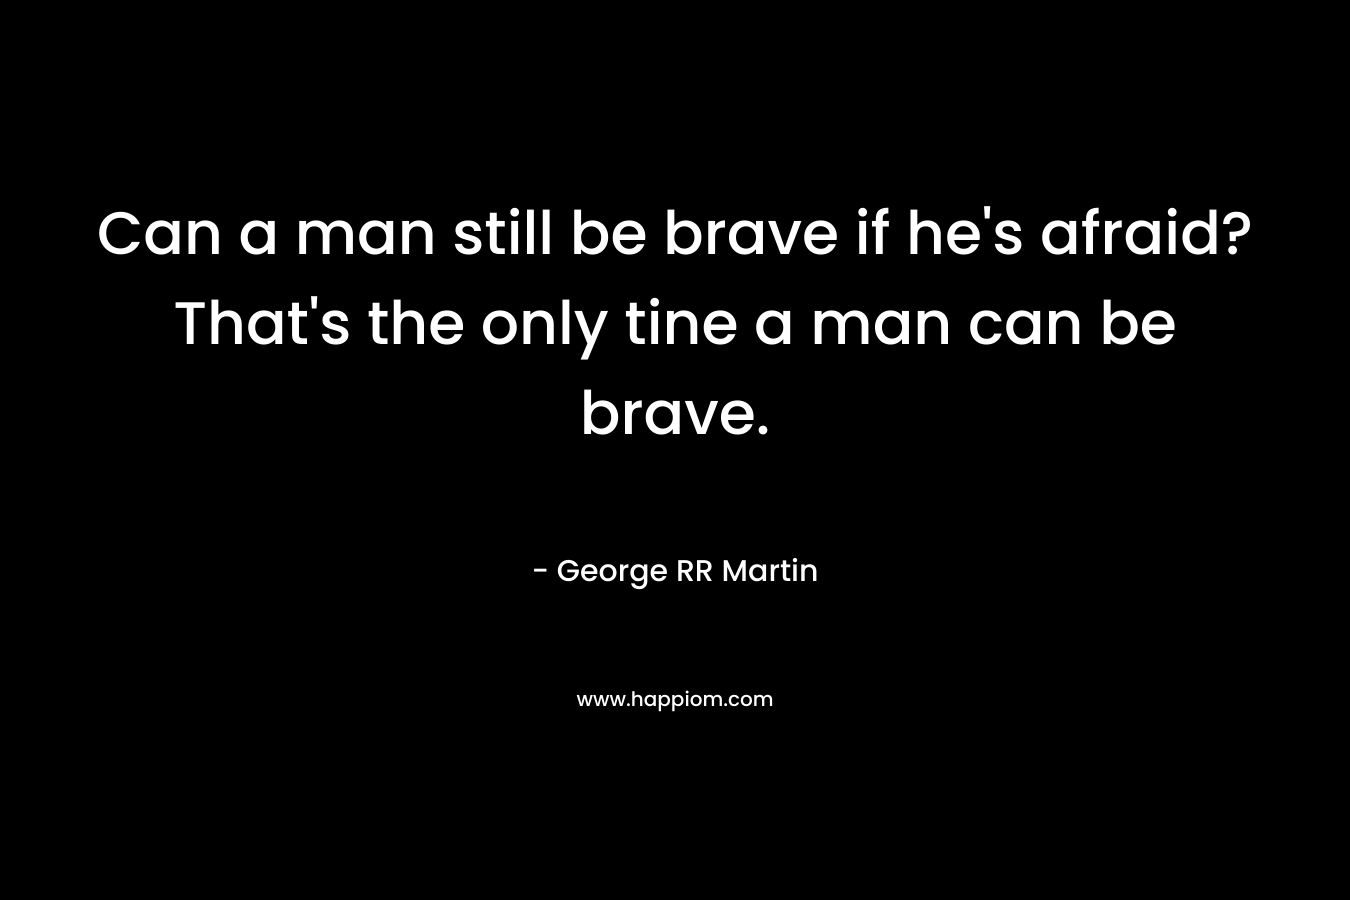 Can a man still be brave if he's afraid? That's the only tine a man can be brave.